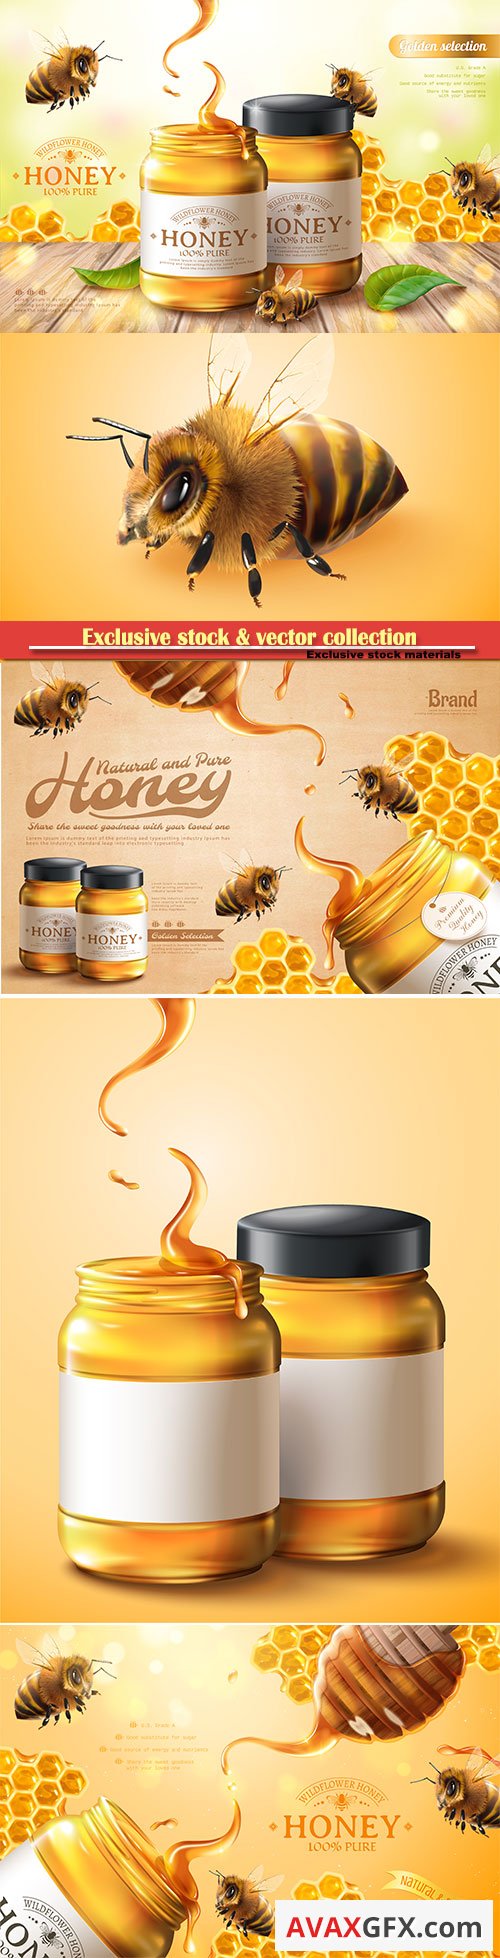 Pure honey ads with bees and honeycomb in 3d vector illustration